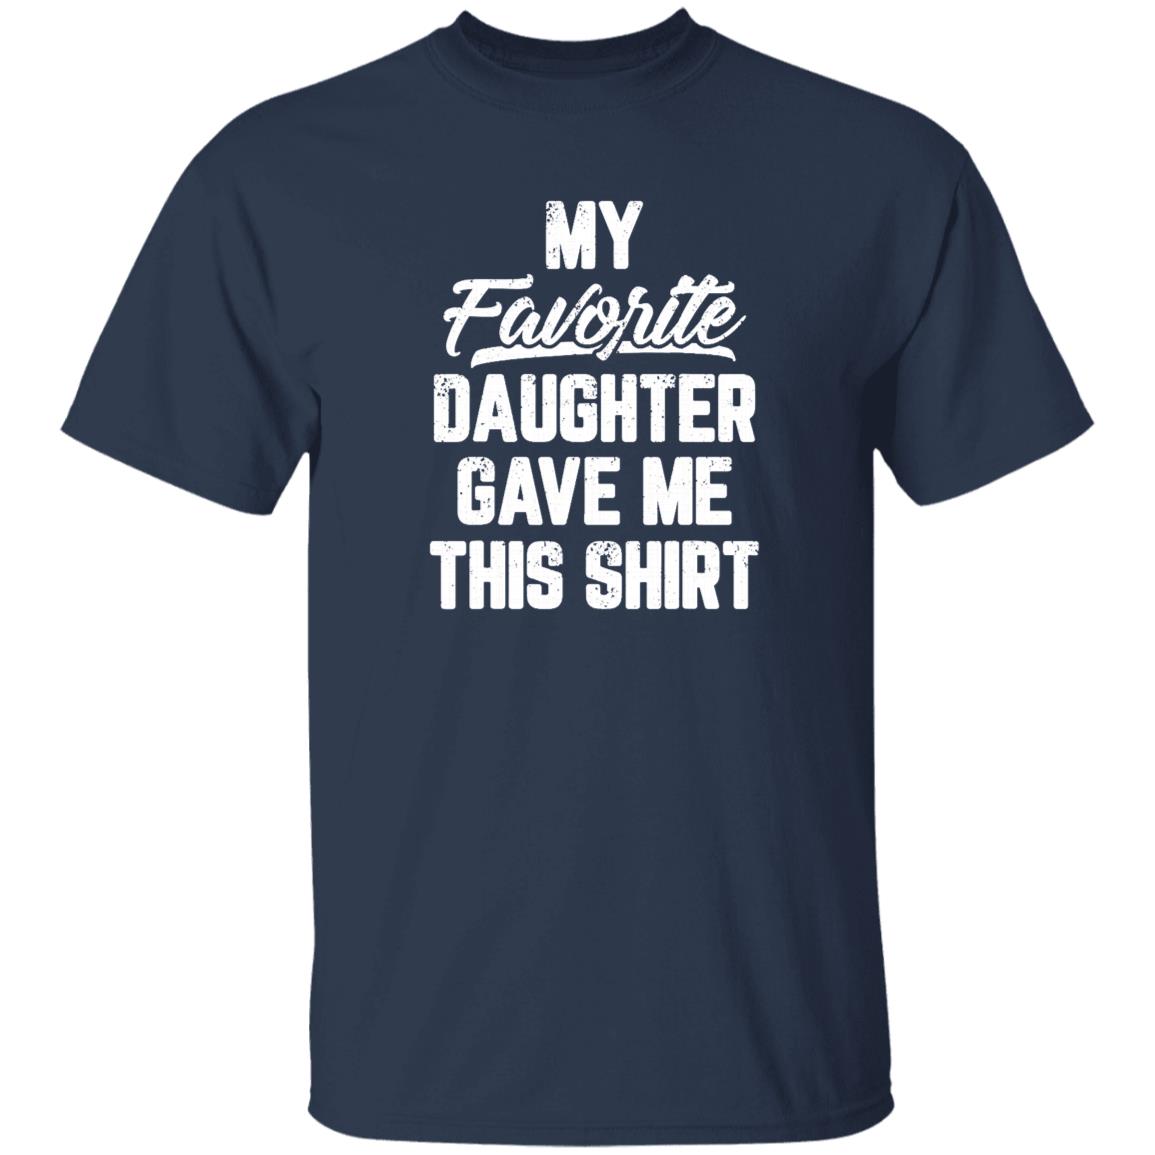 My Favorite Daughter Gave Me This Shirt Funny Shirt